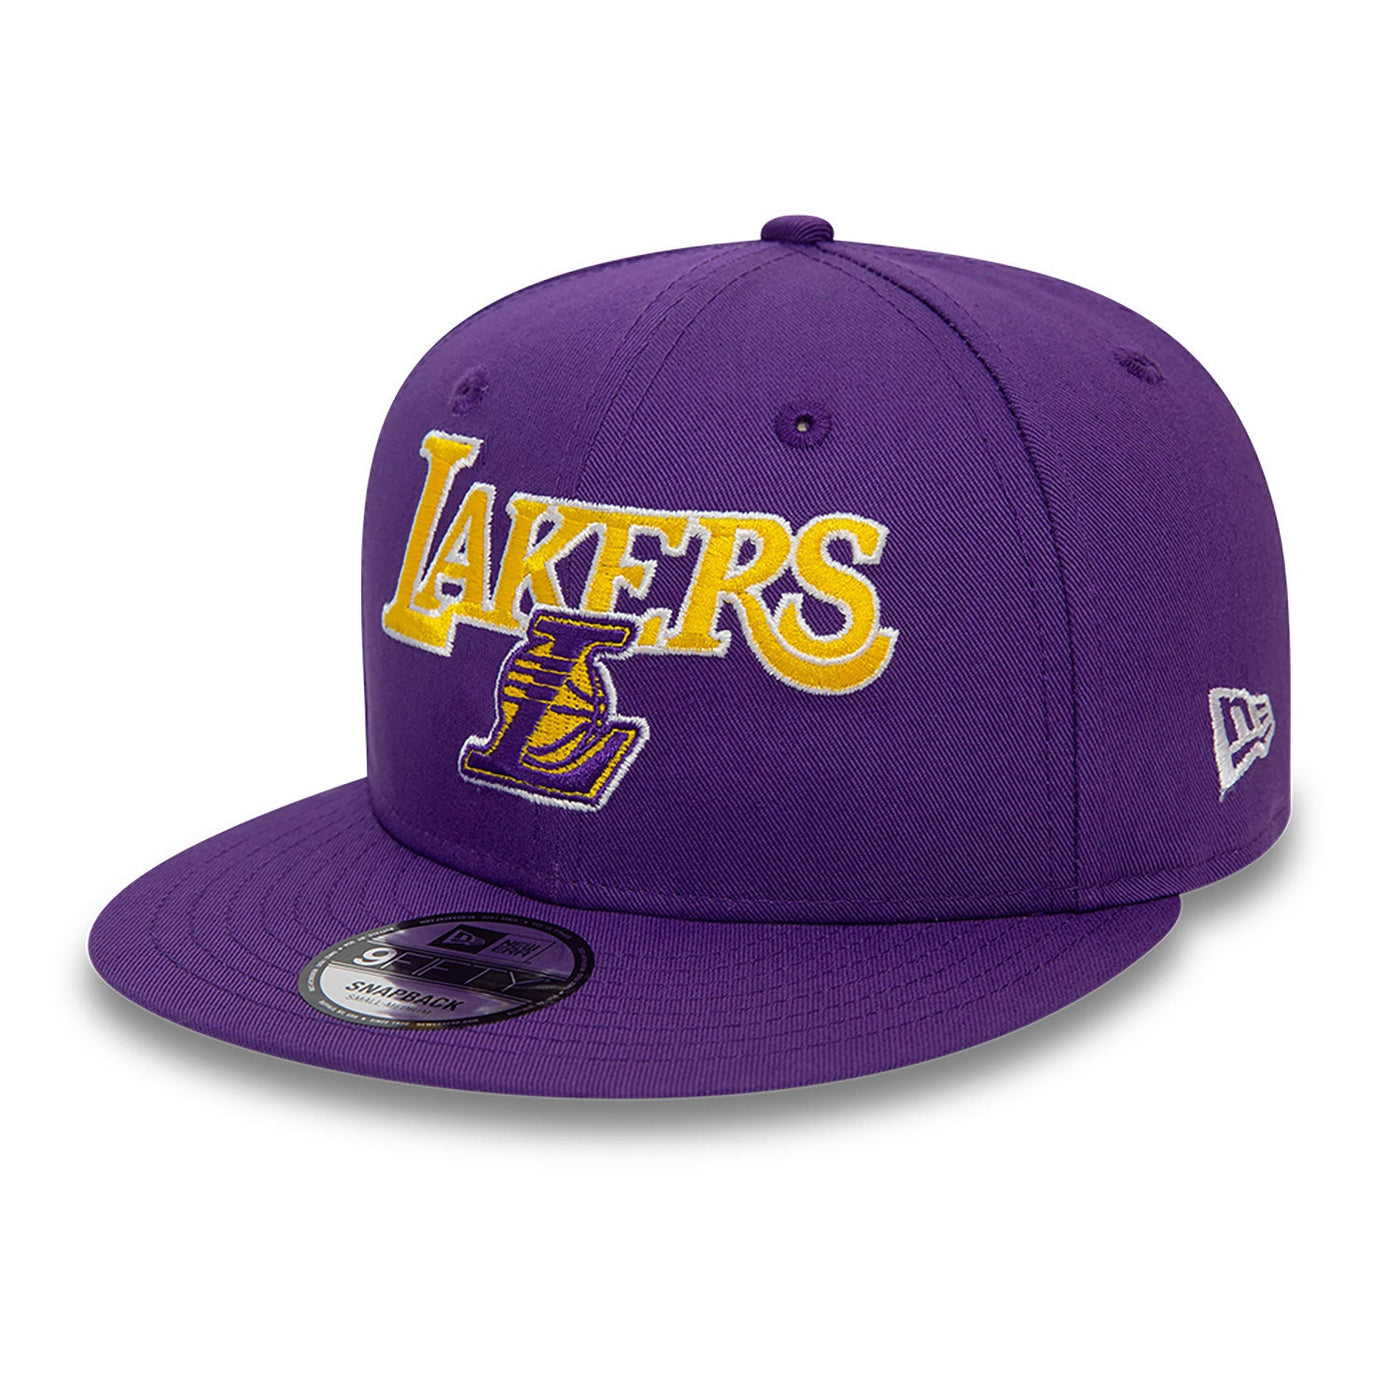 Los Angeles Lakers 9Fifty Adjustable Cap